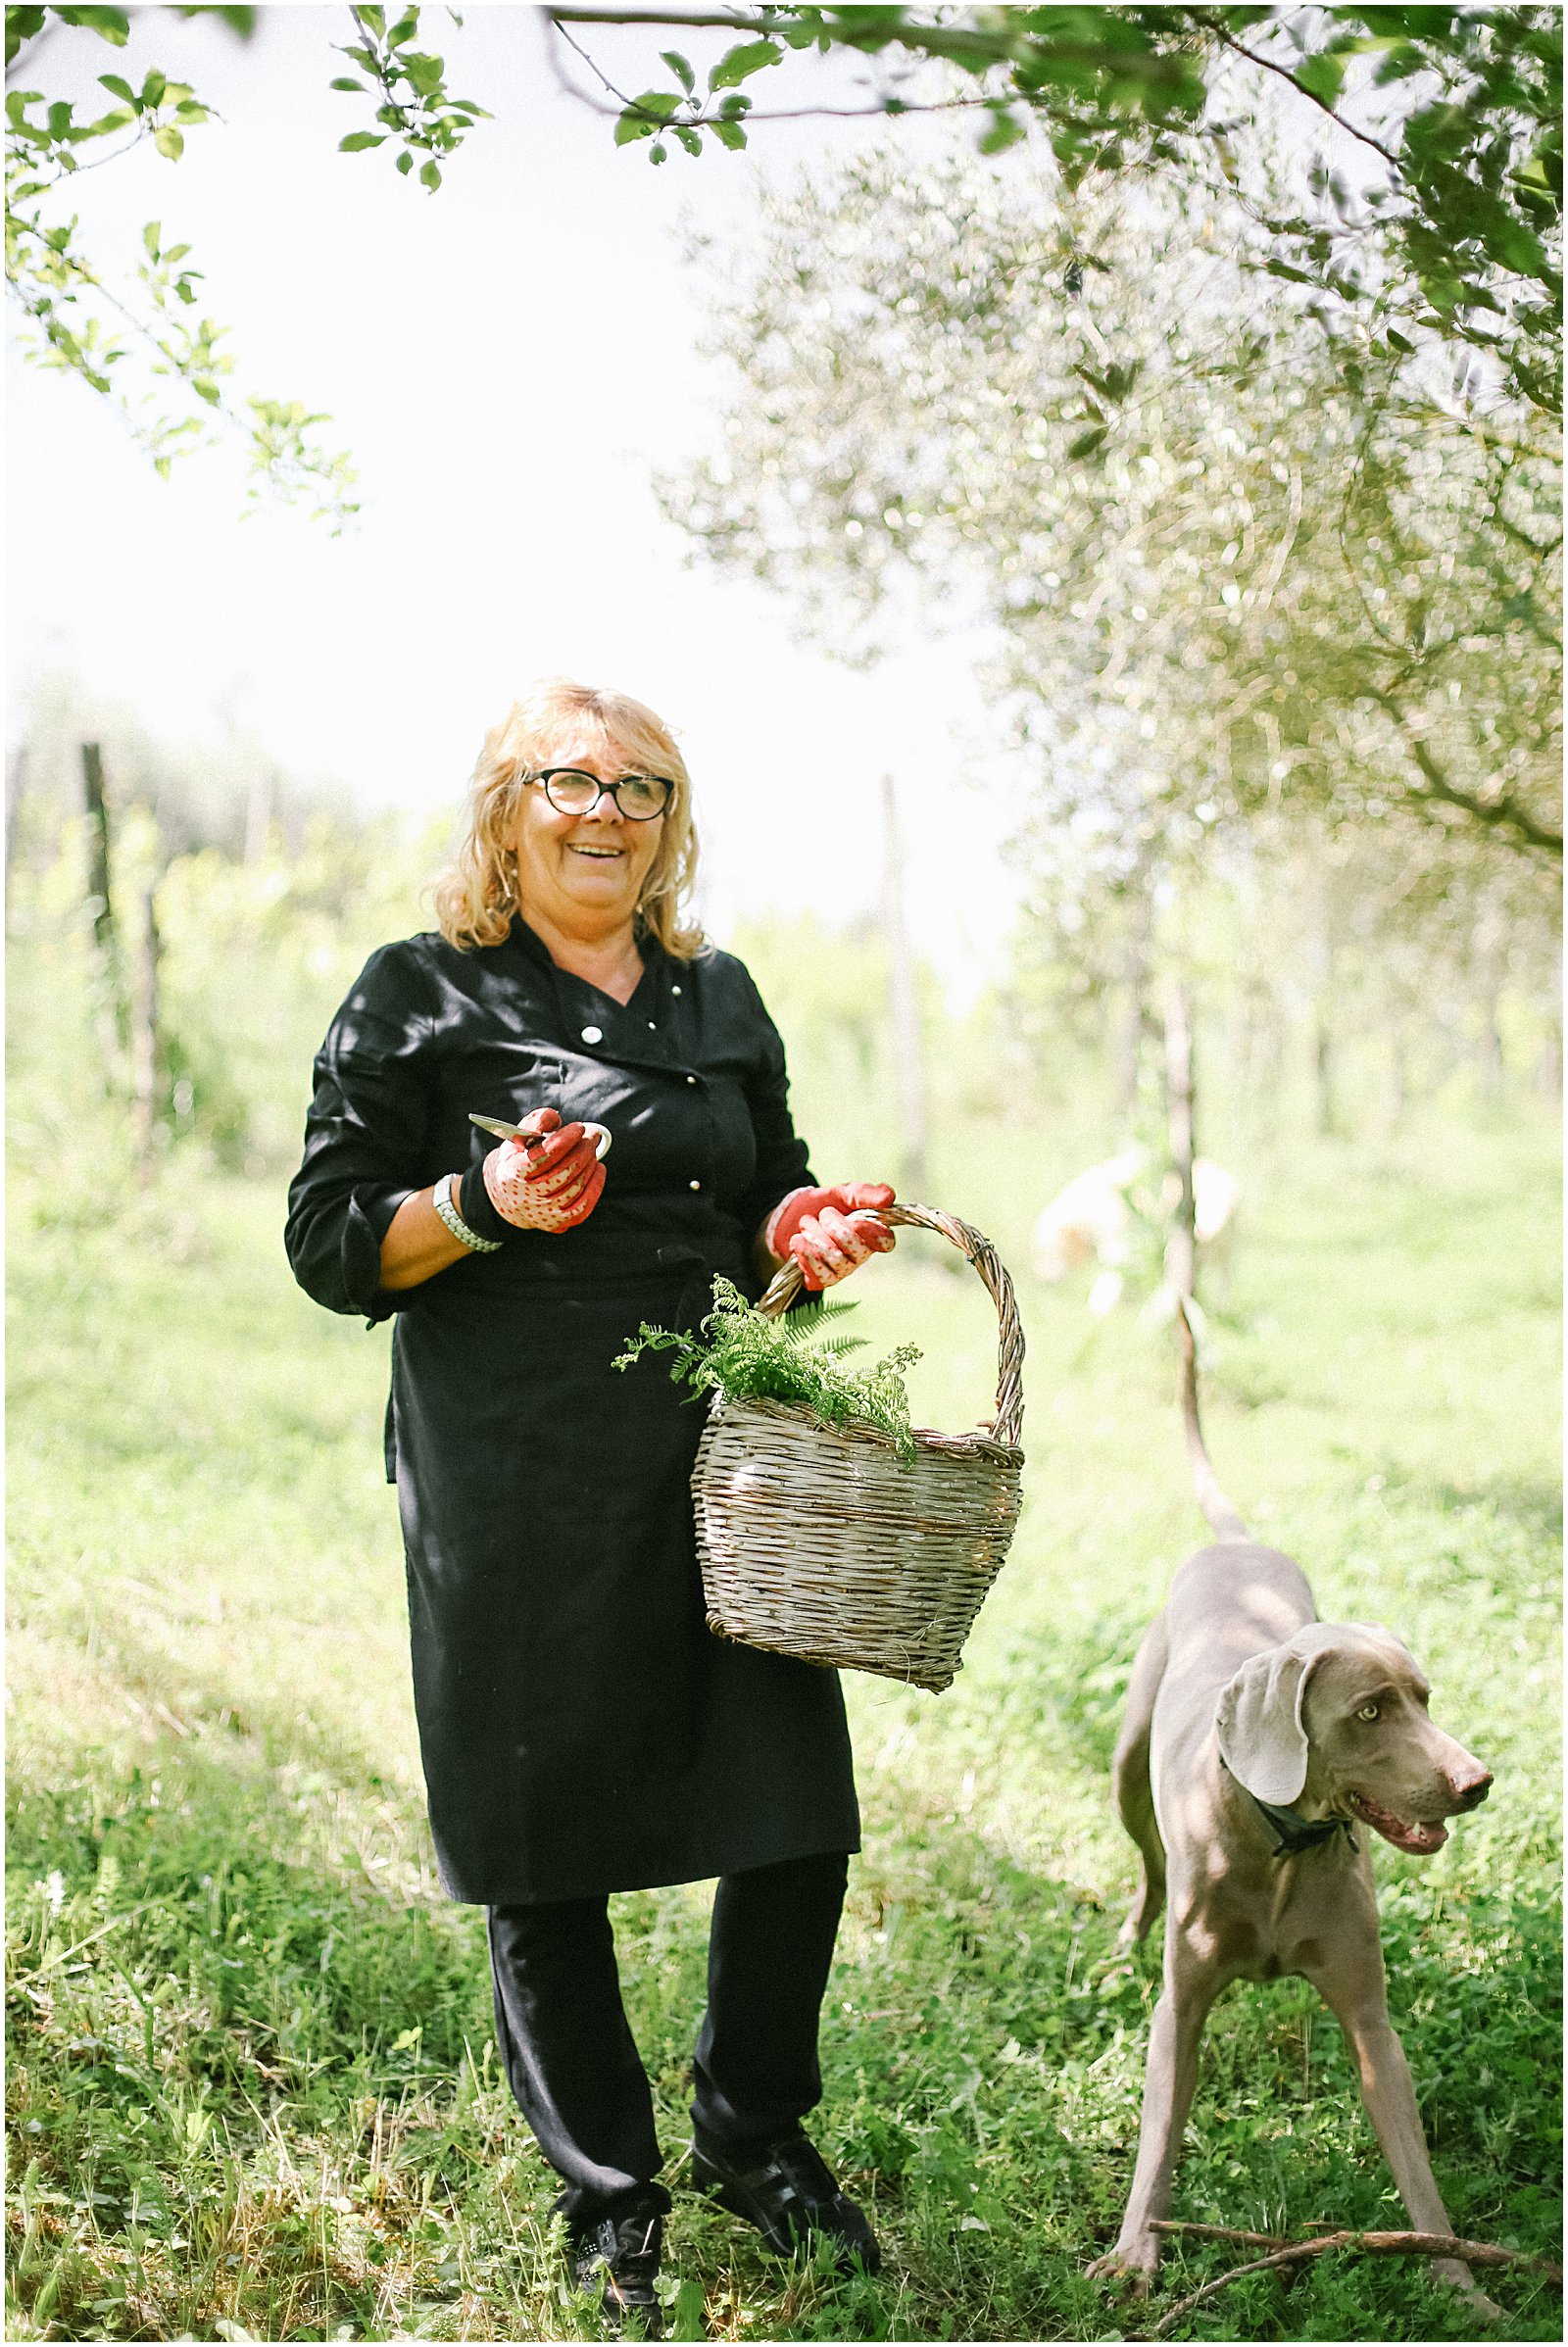 Claudia, our cooking teacher and chef in Zagarolo Italy